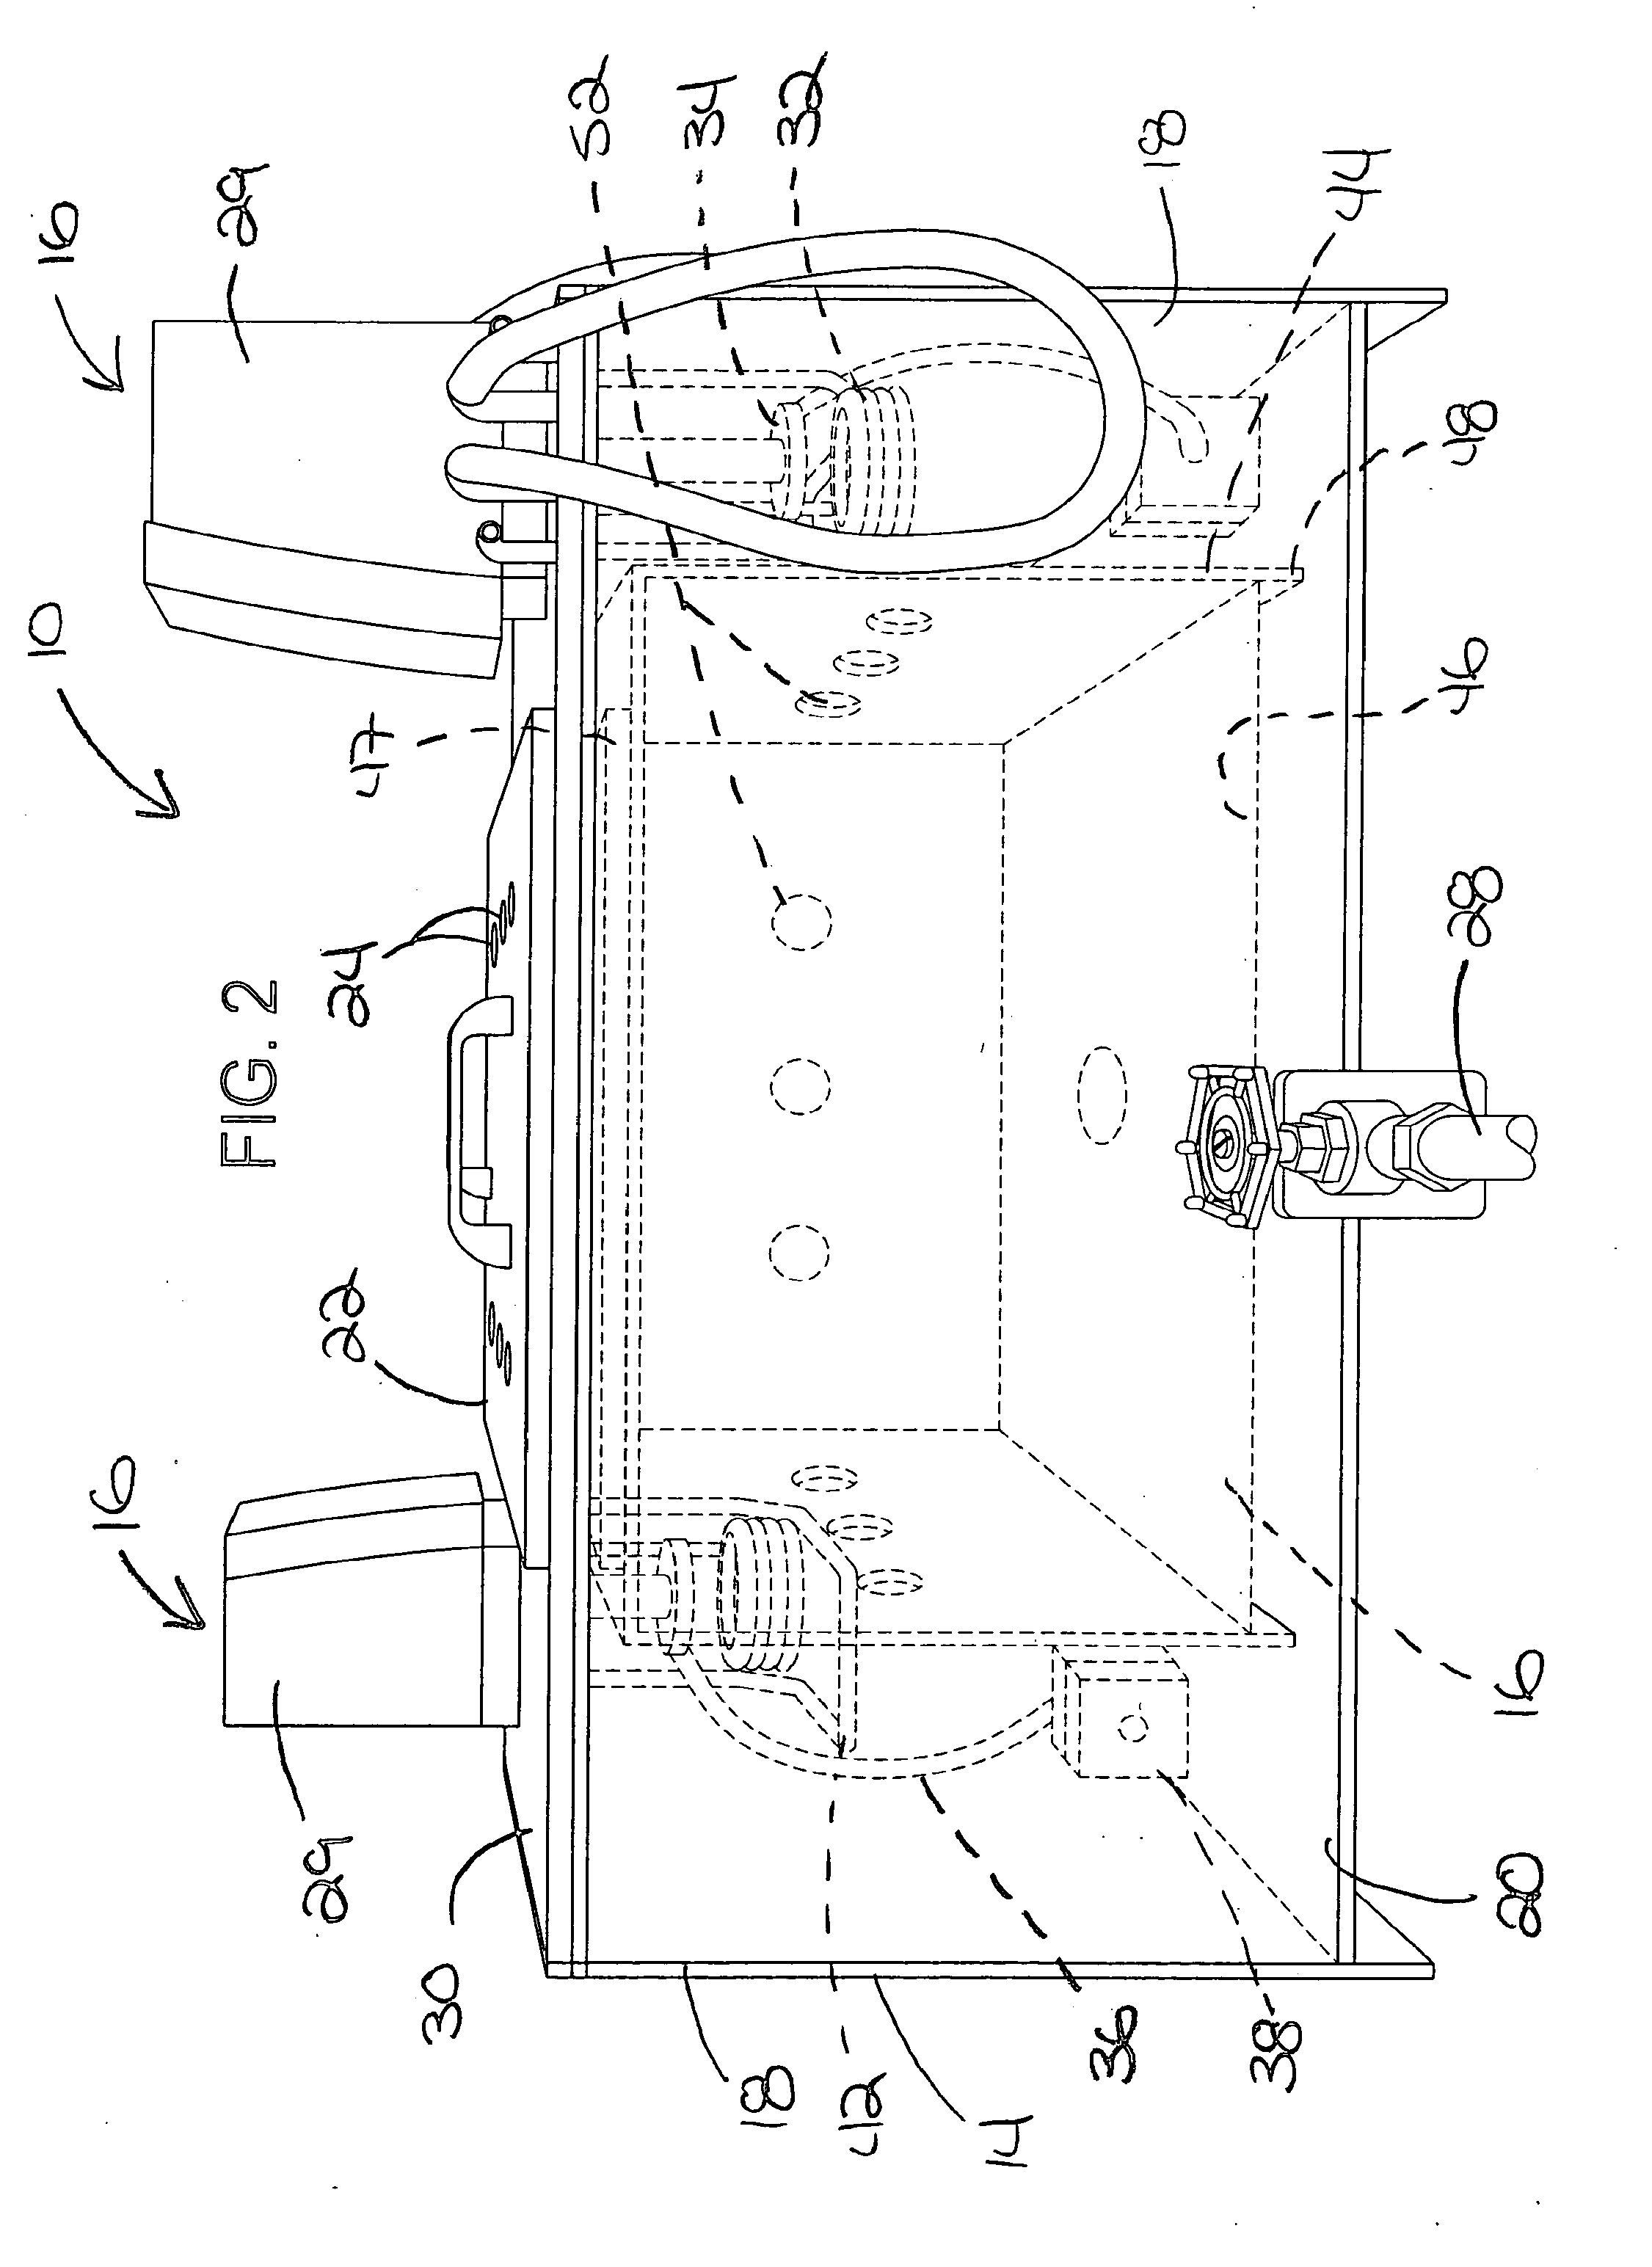 Apparatus for producing a biomimetic coating on a medical implant